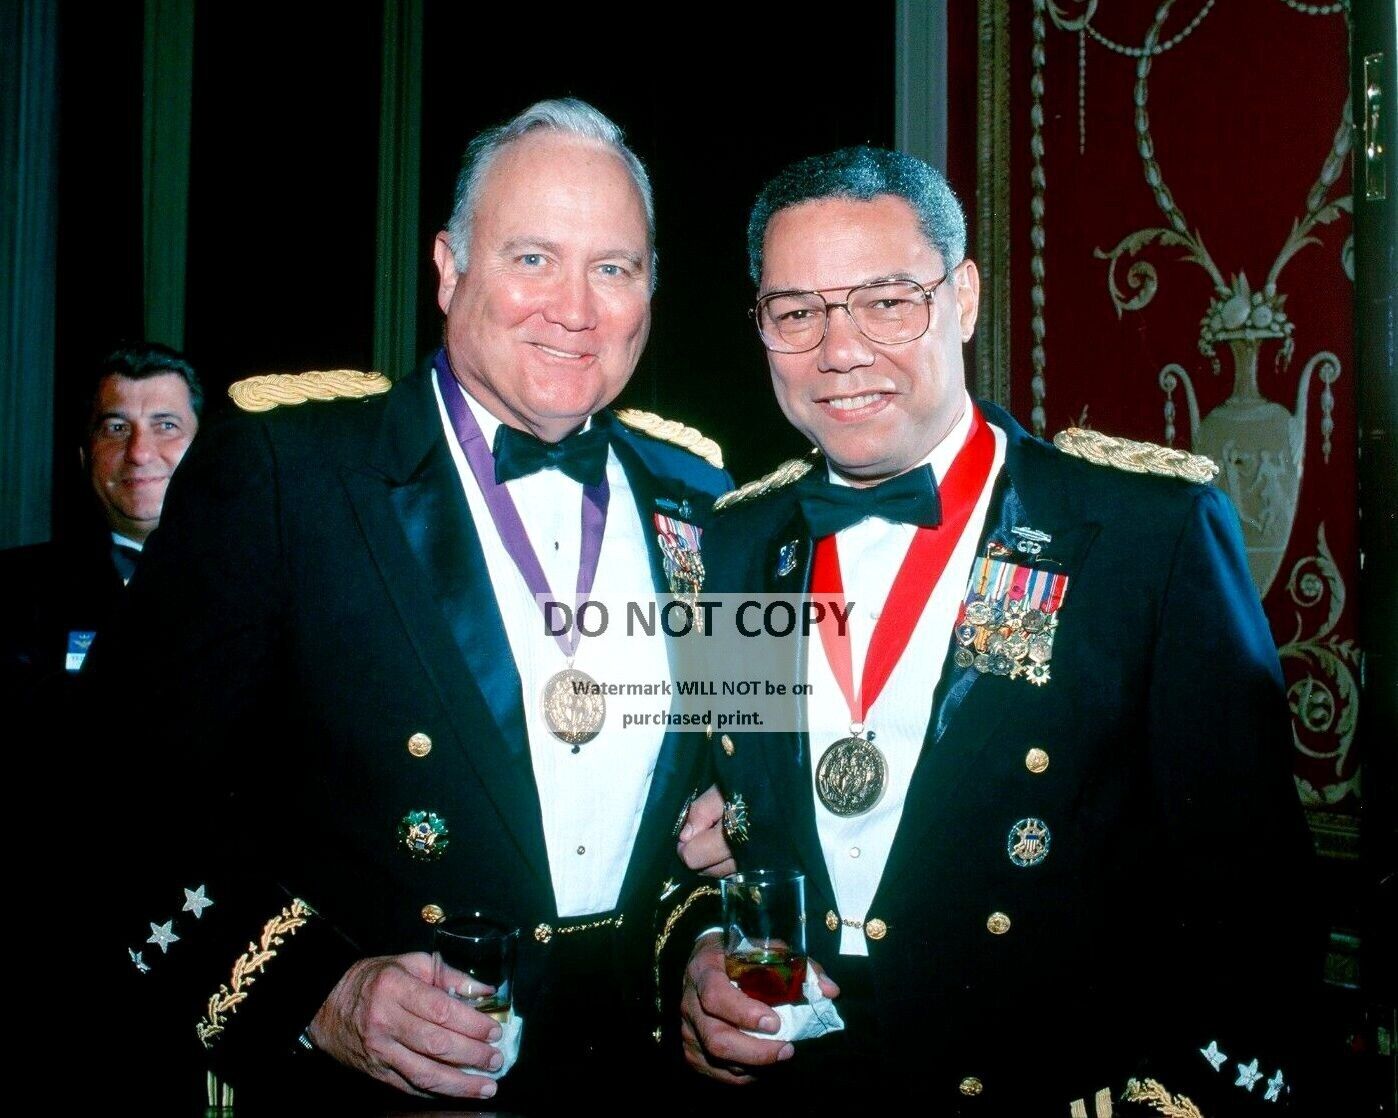 GENERALS H. NORMAN SCHWARZKOPF AND COLIN L. POWELL IN 1991 - 8X10 PHOTO (YW018)